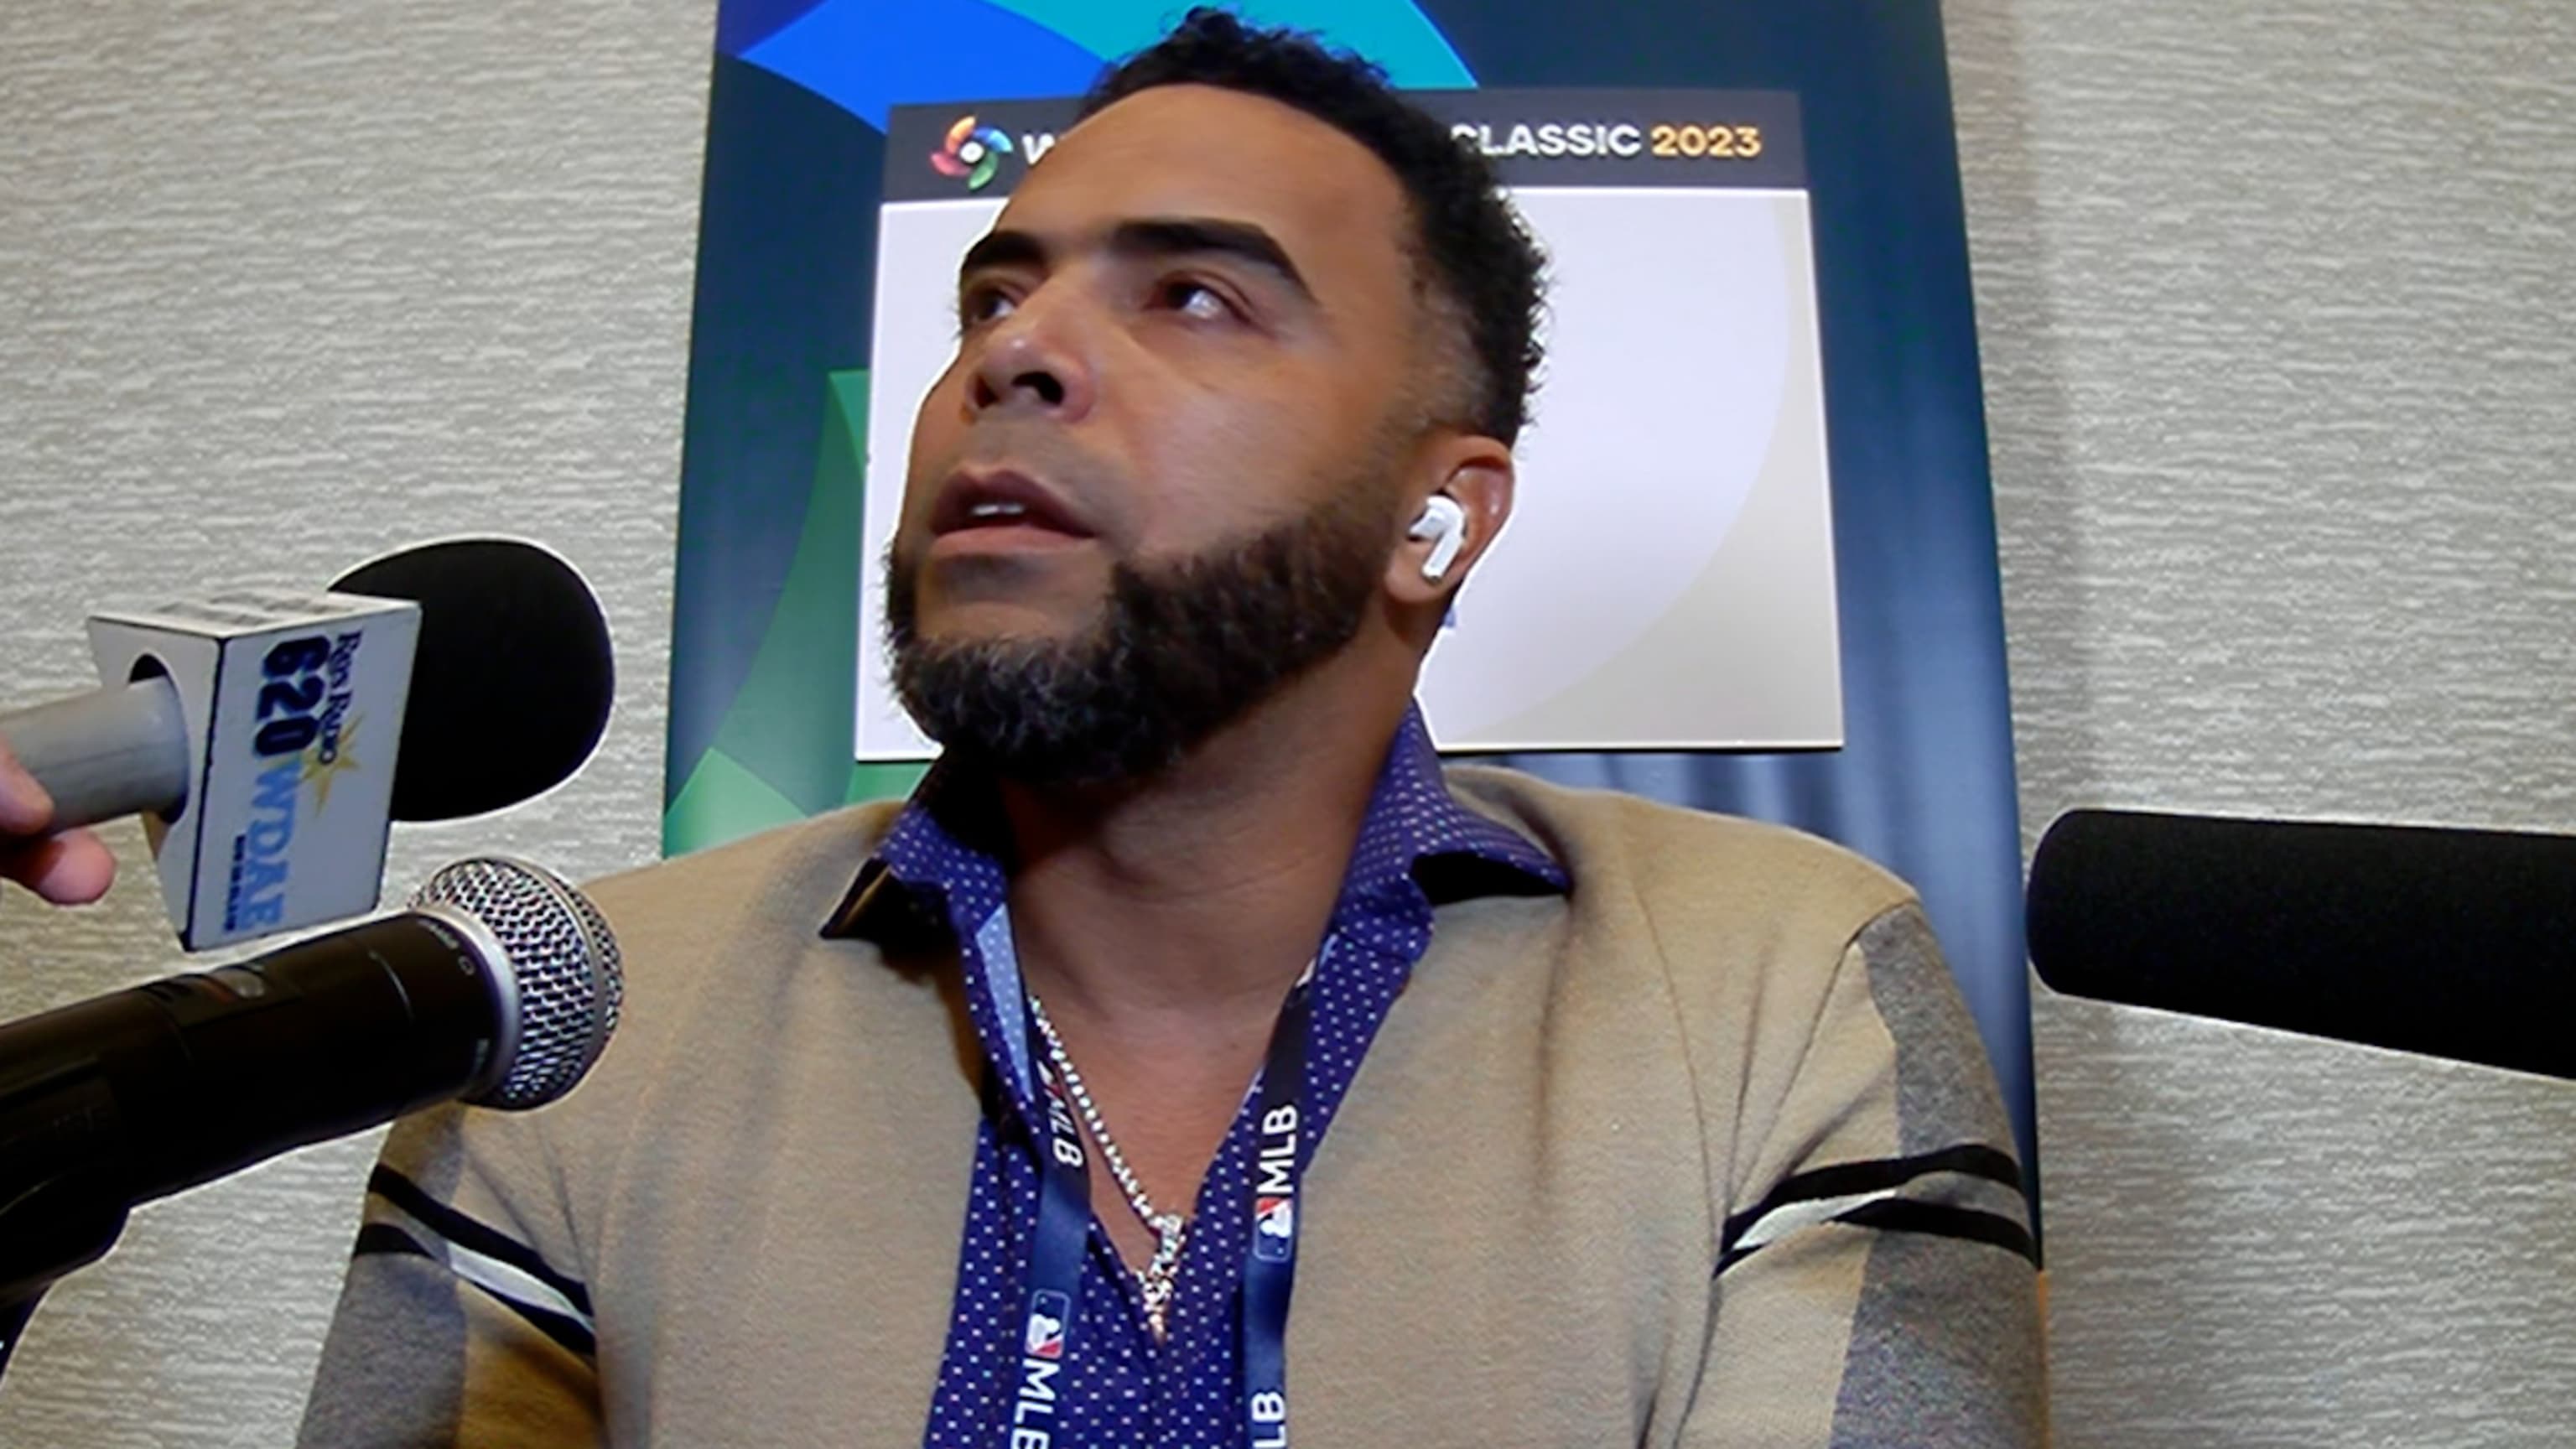 Nelson Cruz on Team DR in Classic